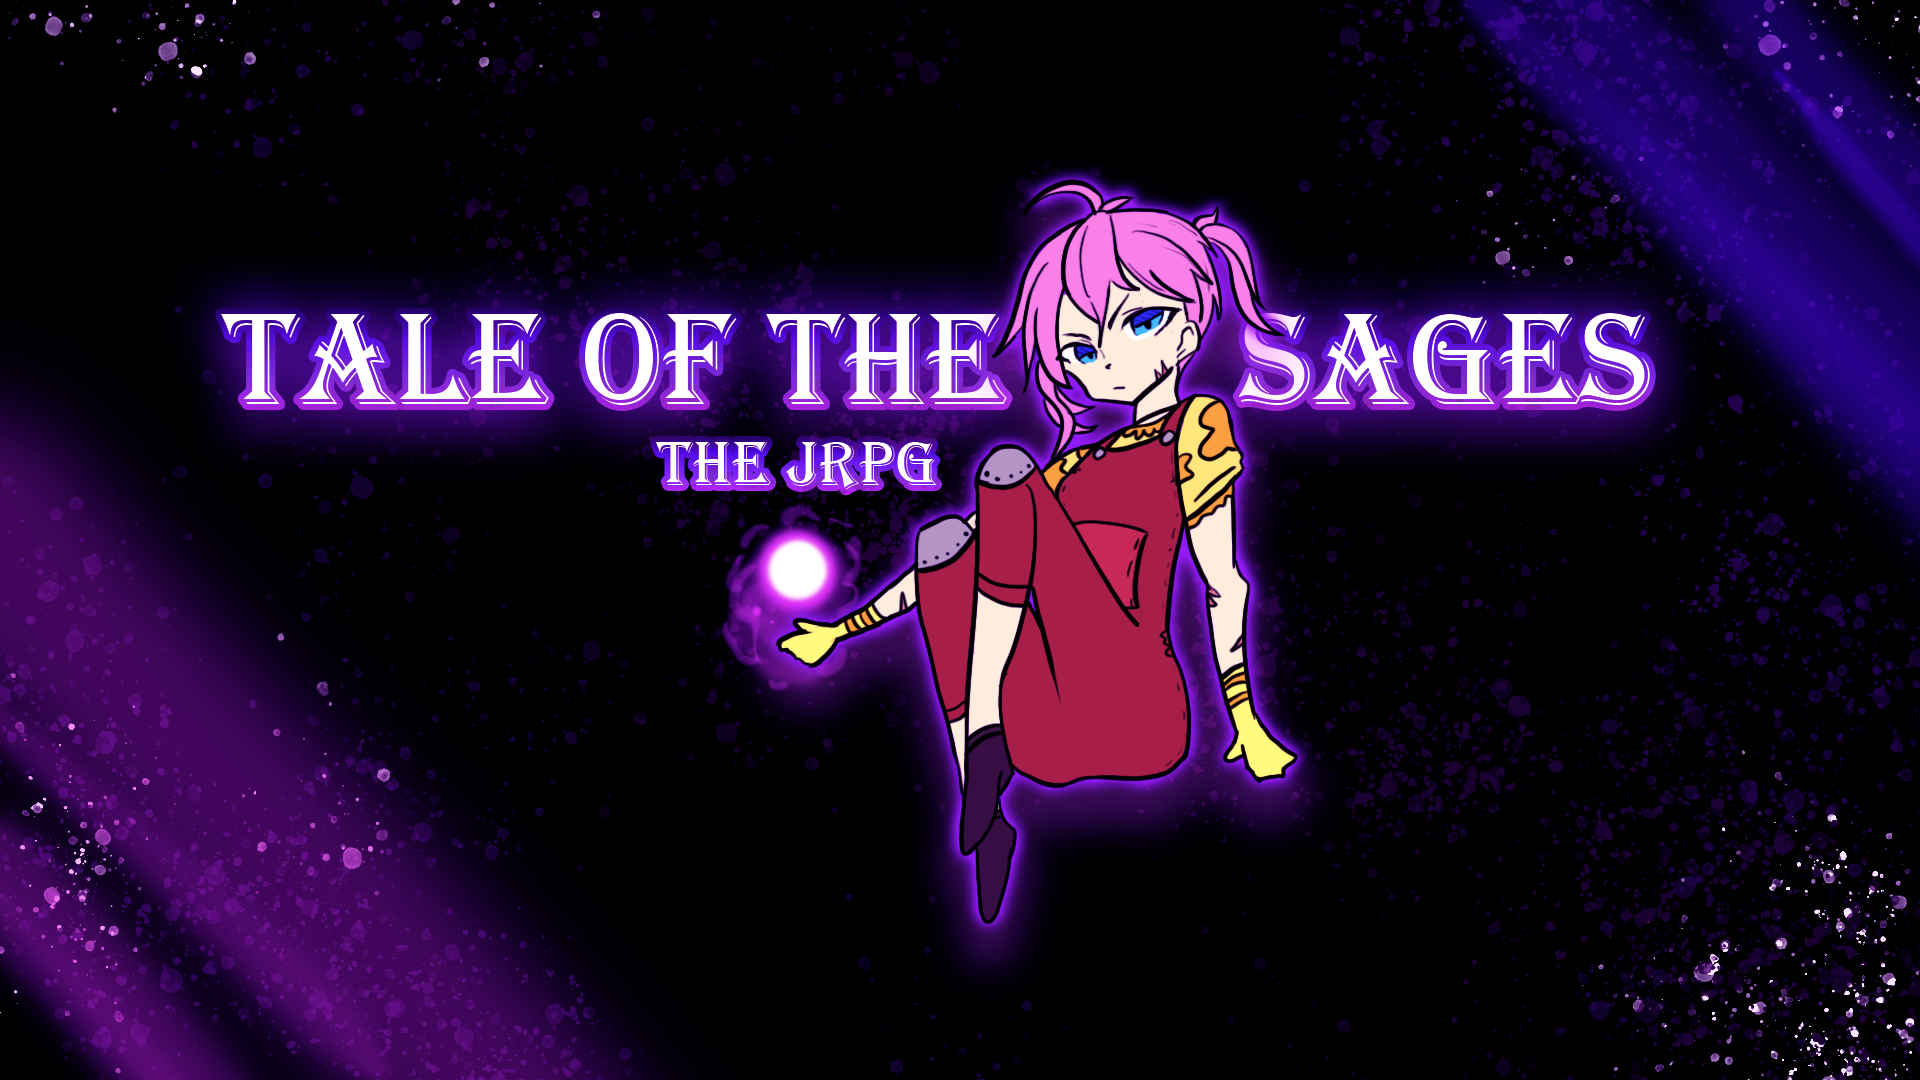 Tale of the Sages